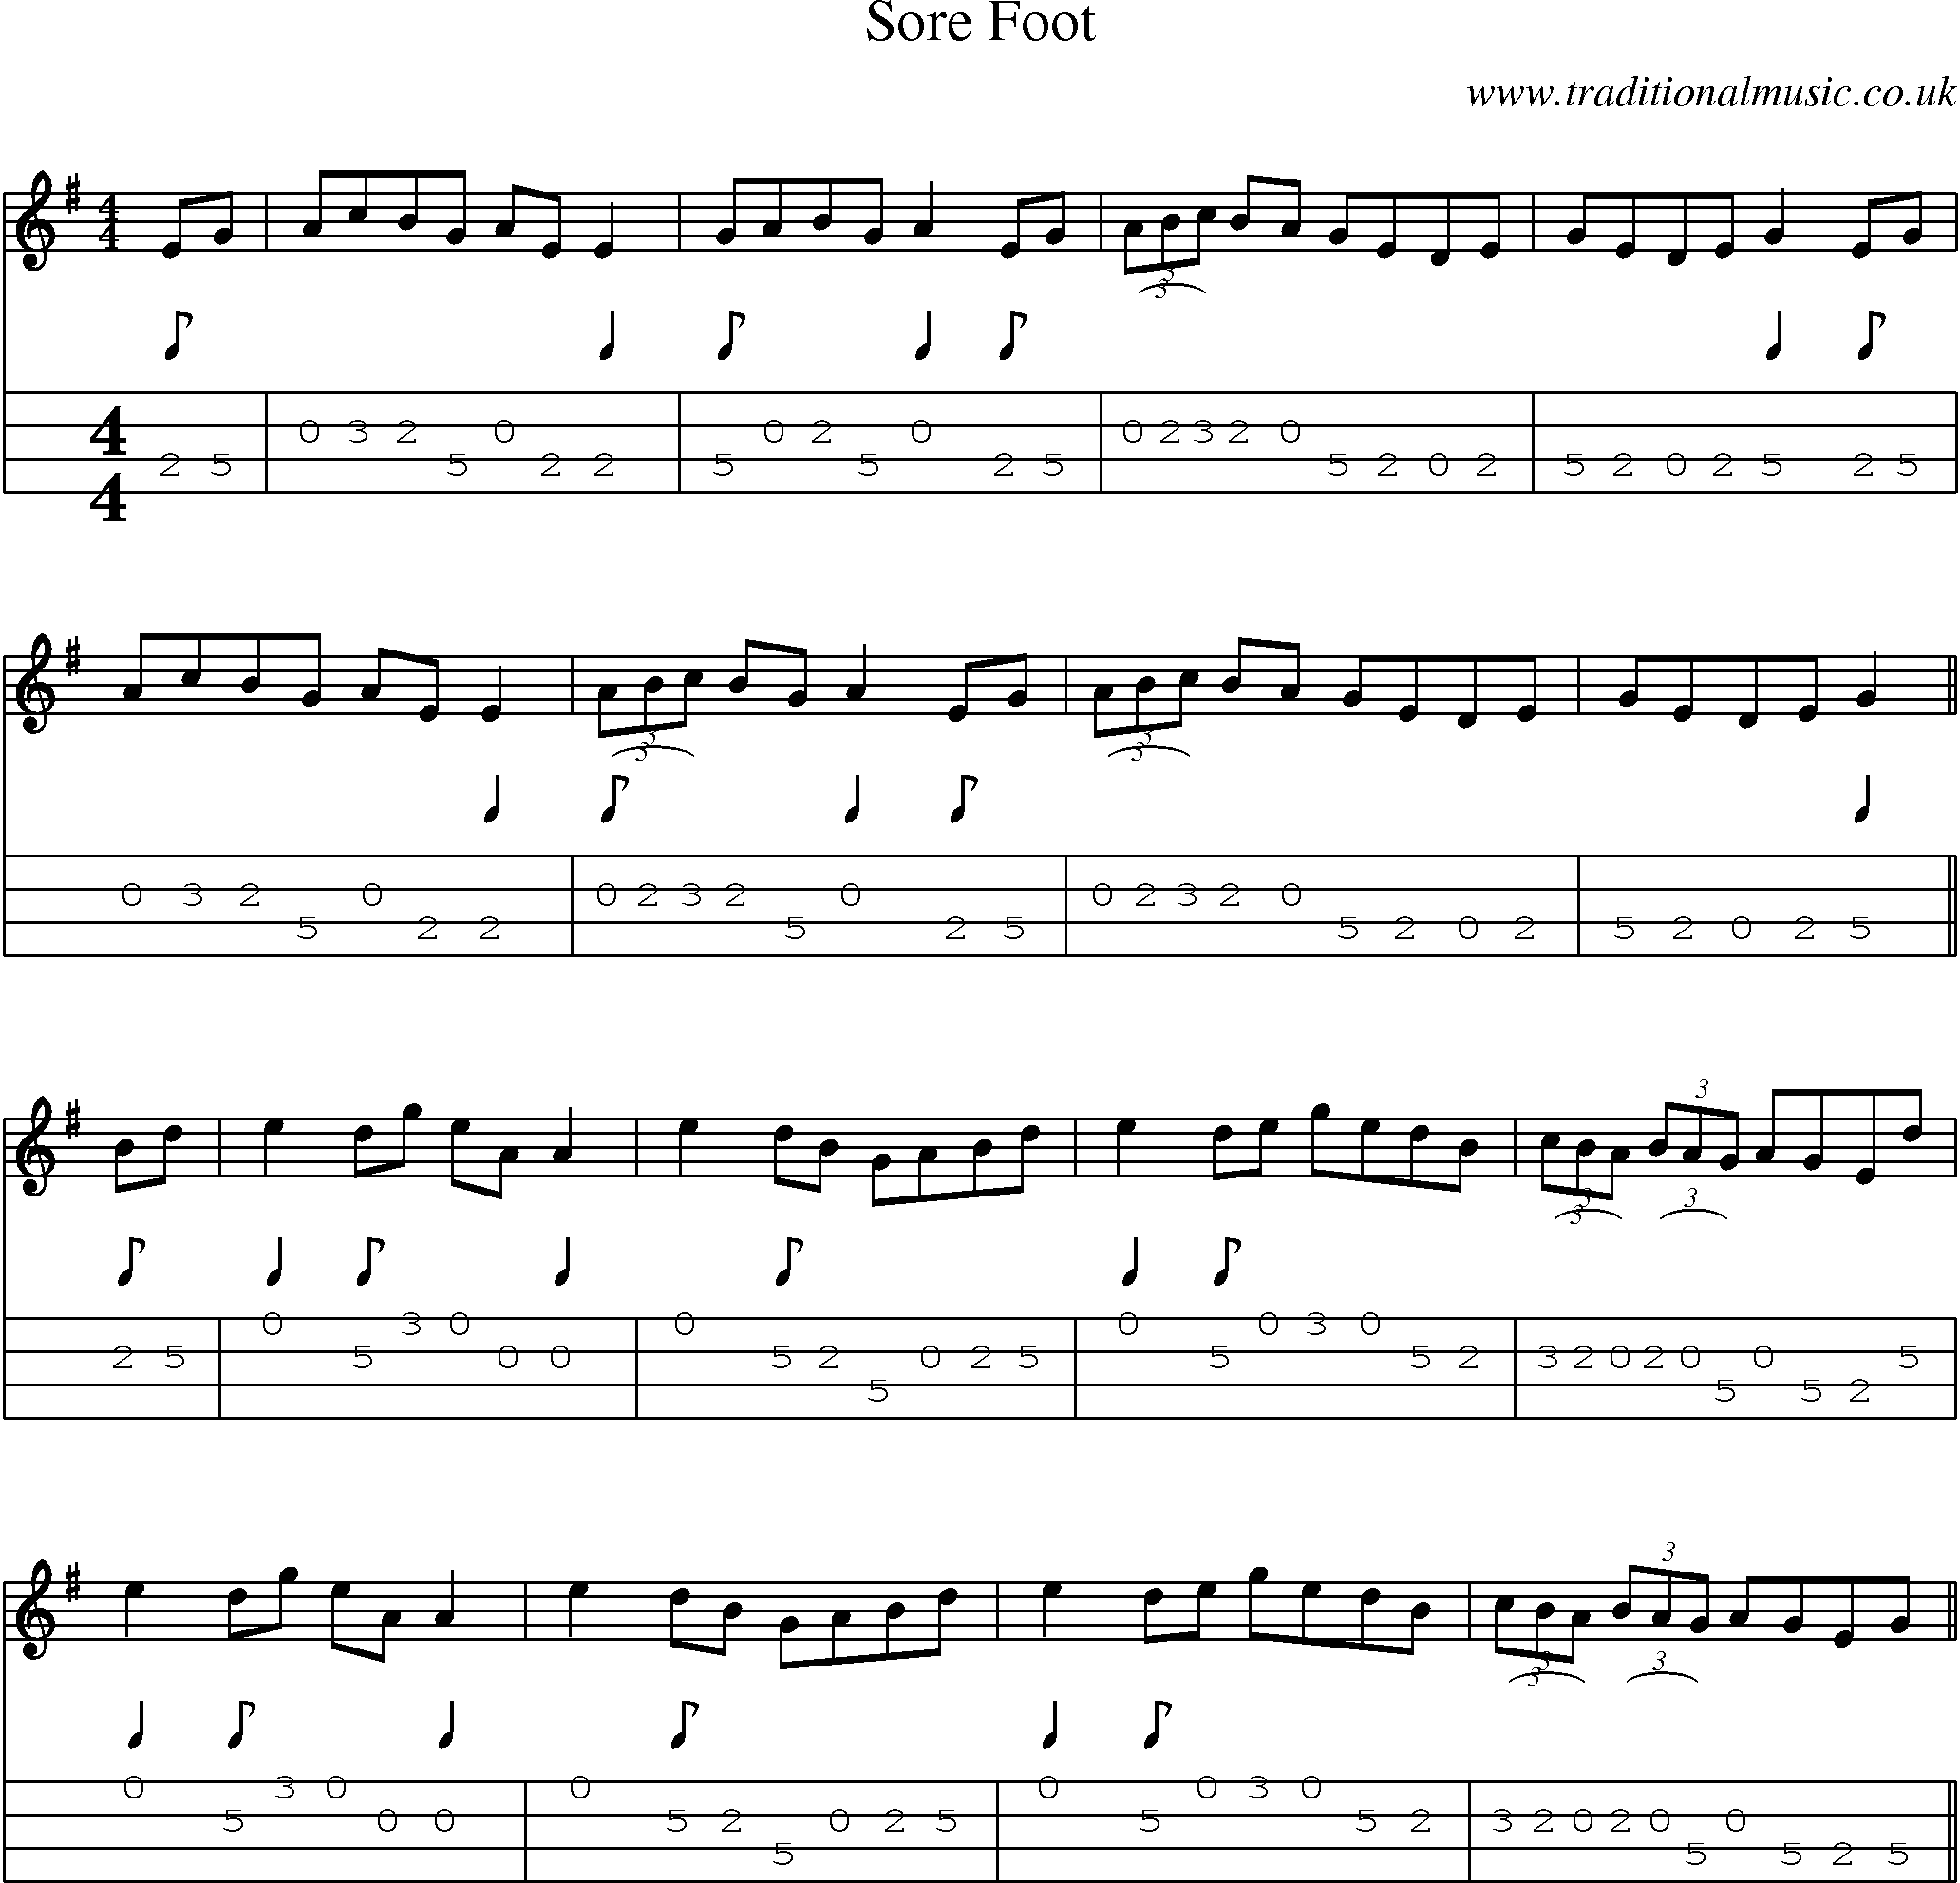 Music Score and Mandolin Tabs for Sore Foot